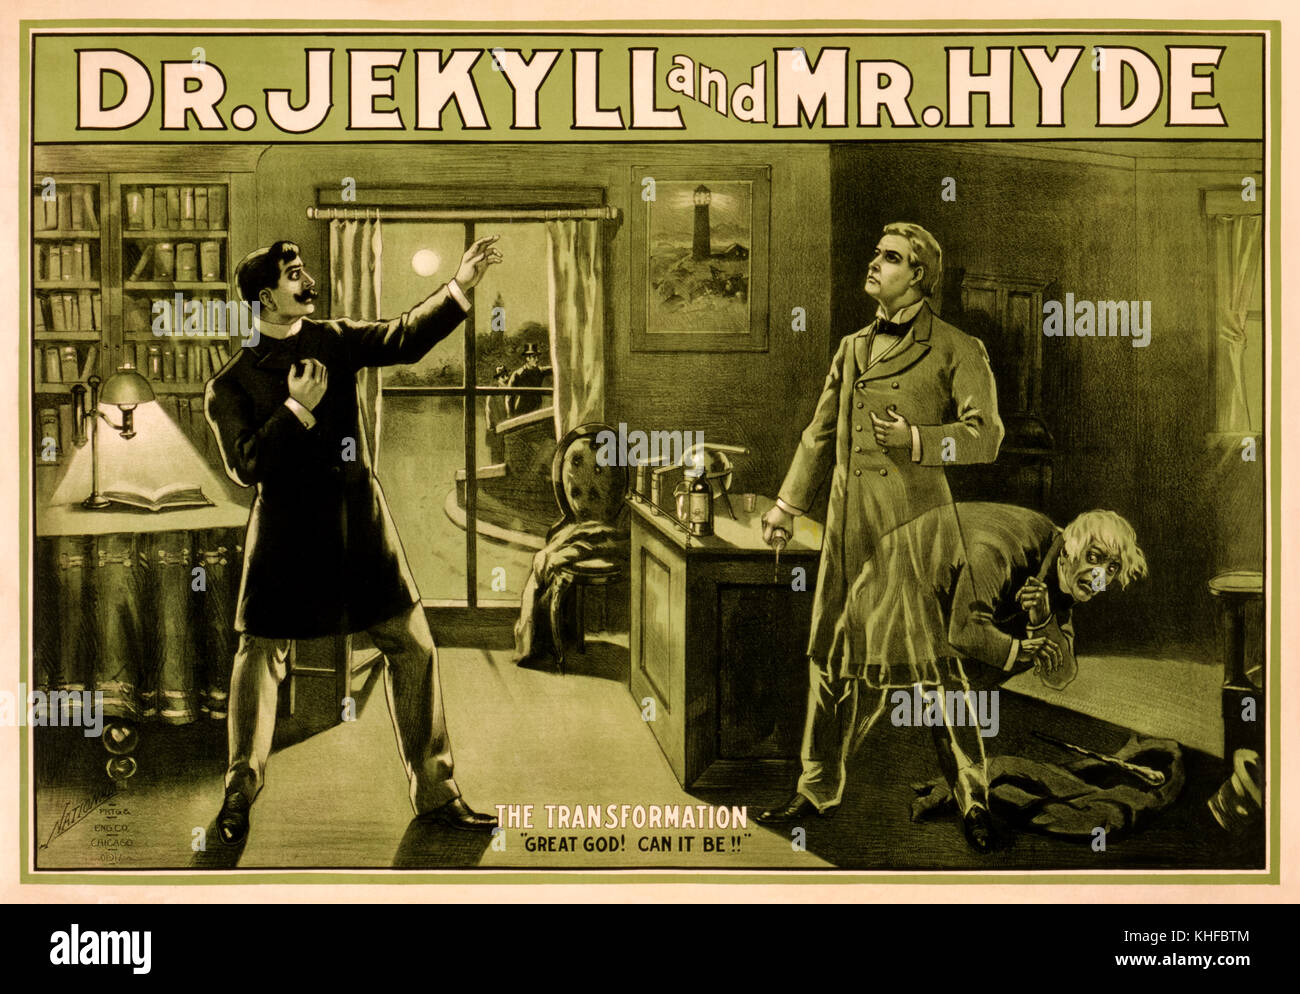 Playbill for ‘Dr. Jekyll and Mr. Hyde’ a 1887 stage adaptation of Robert Louis Stevenson (1850-1894) Gothic novel the ‘Strange Case of Dr Jekyll and Mr Hyde’ published in 1886. Richard Mansfield (1857-1907) played the dual characters of Jekyll and Hyde. Poster from 1888 performance at Hooley's Theatre, Chicago captioned ‘The transformation. 'Great God! Can it be!!'’ showing Dr Hastie Lanyon witnessing the change. Stock Photo